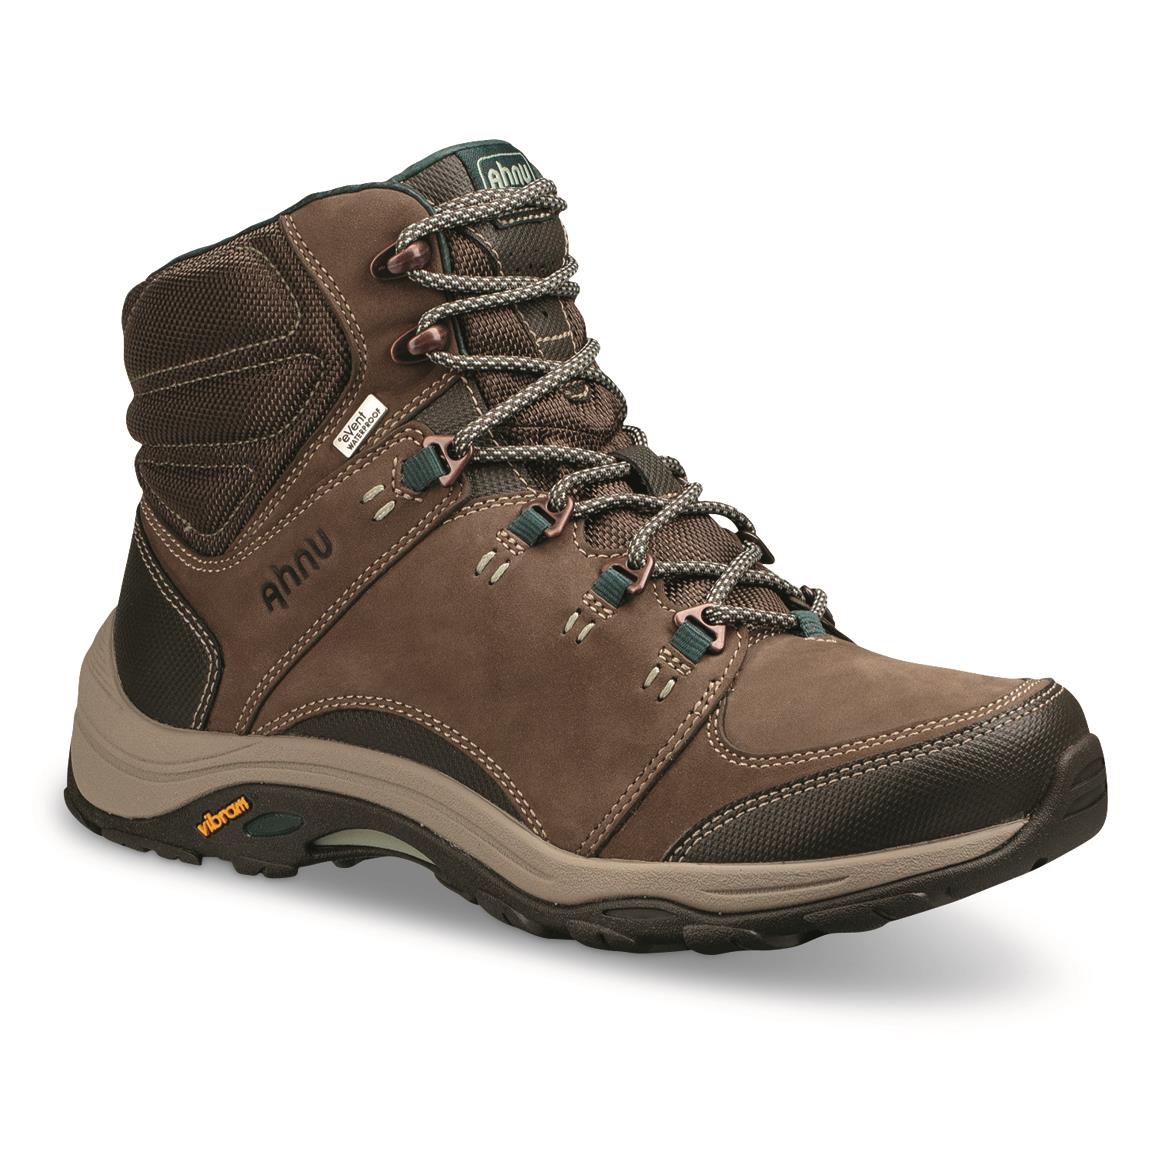 Ahnu by Teva Women's Montaro III Waterproof Hiking Boots - 707672, Hiking Boots & Shoes at 